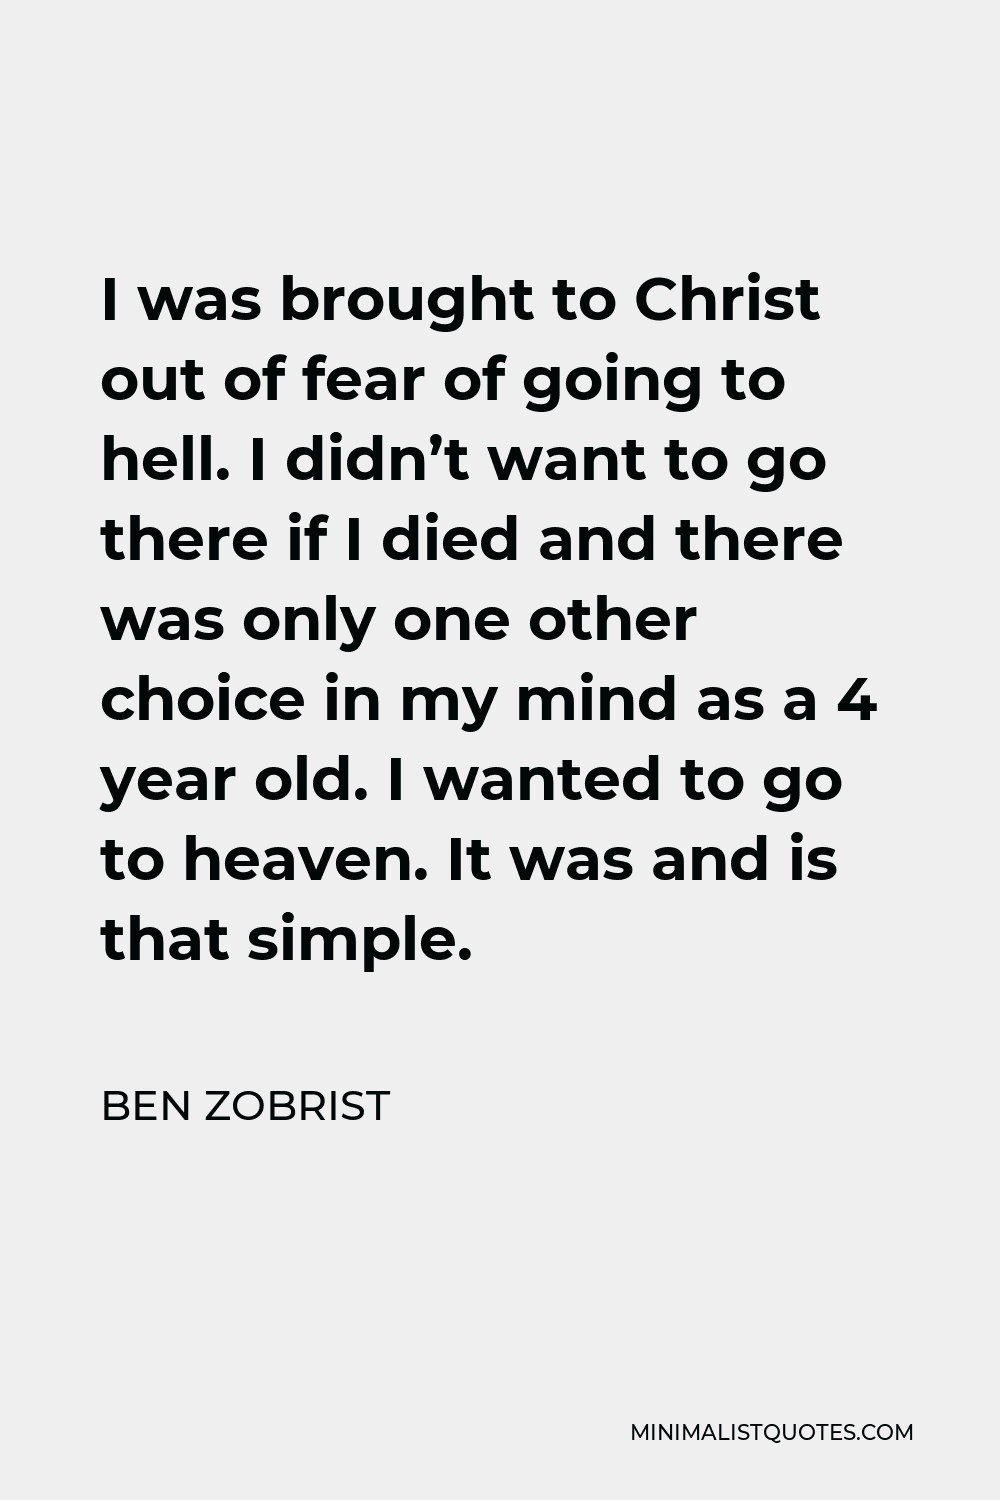 Ben Zobrist Quote - I was brought to Christ out of fear of going to hell. I didn’t want to go there if I died and there was only one other choice in my mind as a 4 year old. I wanted to go to heaven. It was and is that simple.